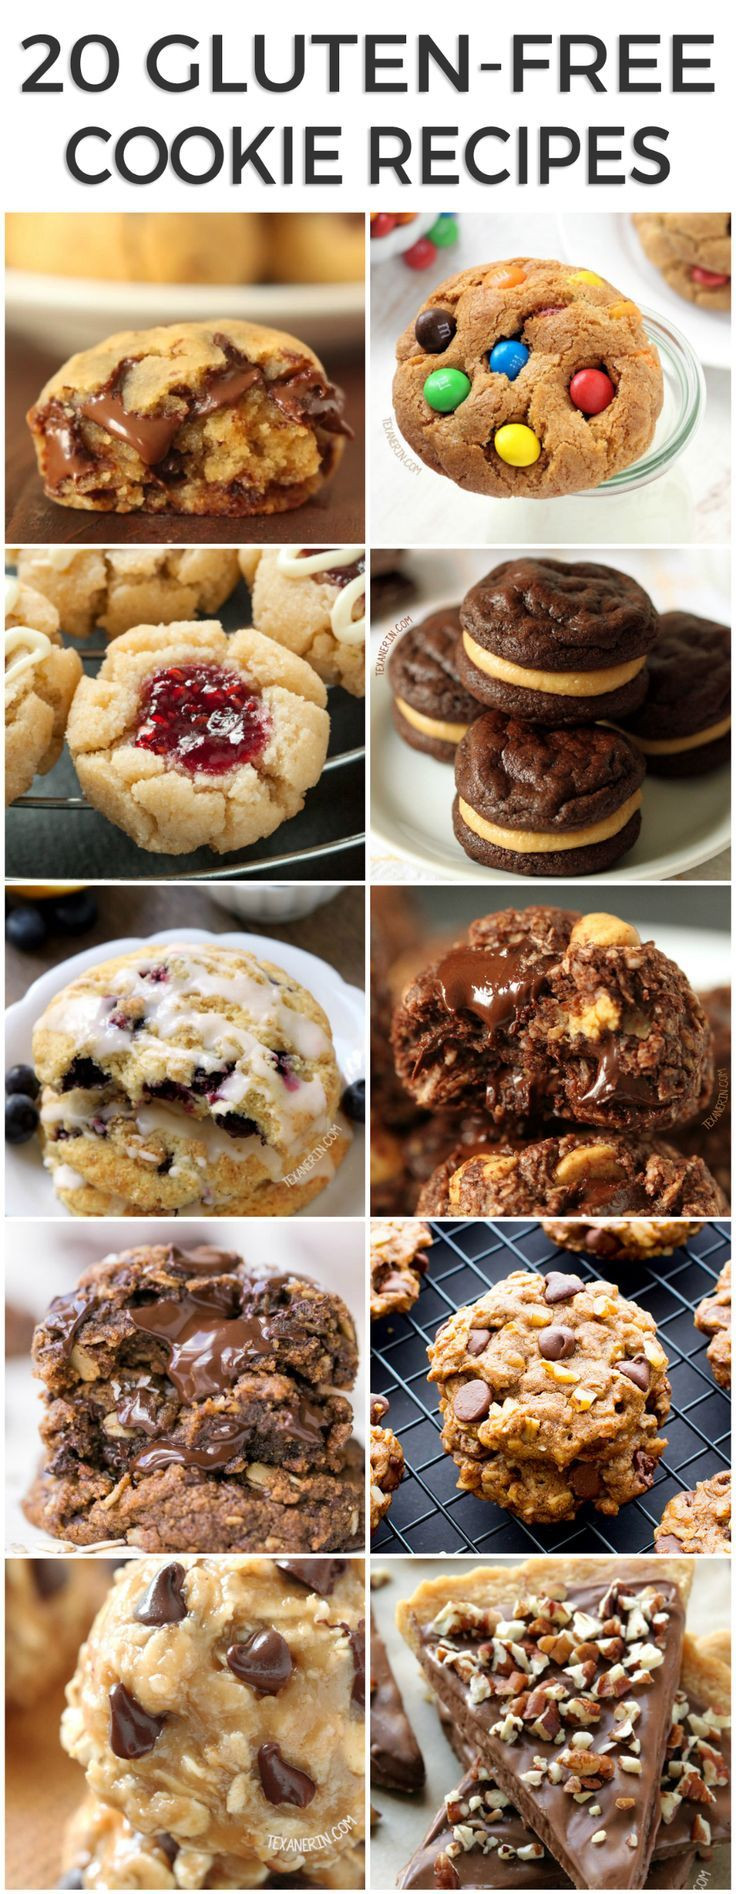 Gluten Free Dairy Free Cookie Recipes
 692 best Cookie Recipes images on Pinterest